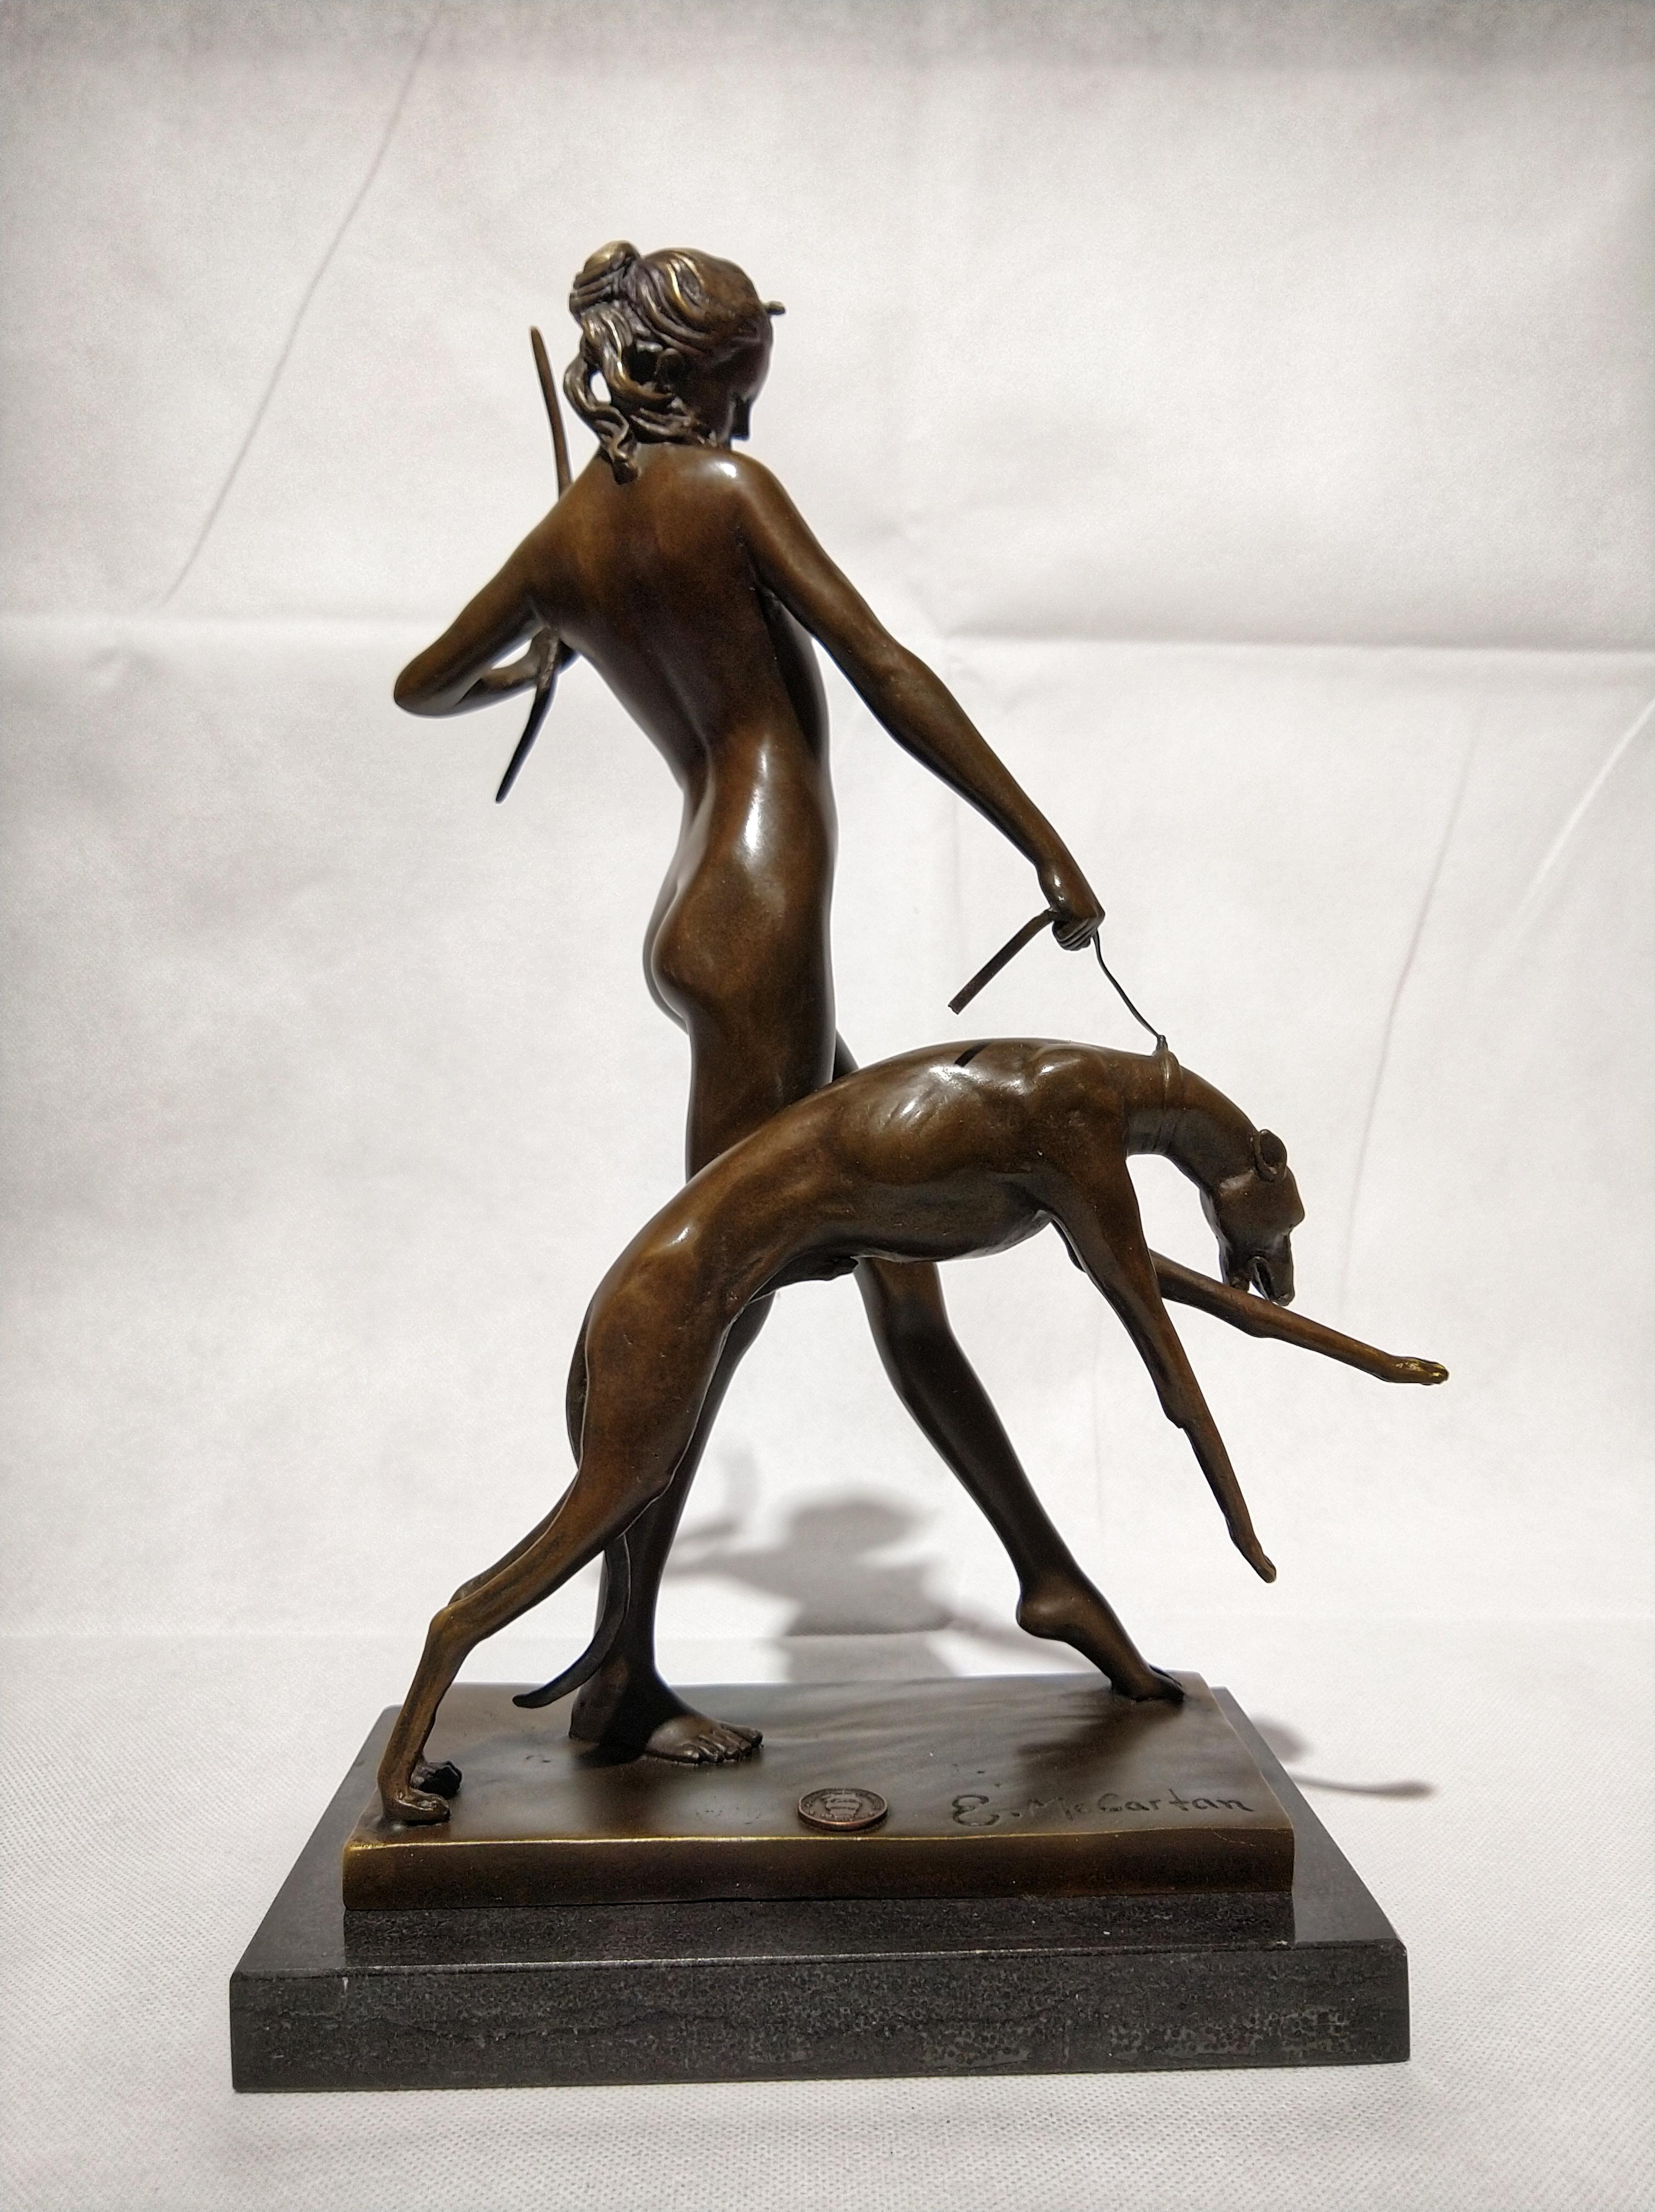 Patinated 20th Century Art Deco Sculpture Figure Plum Bronze Diana Goddess of Hunting For Sale